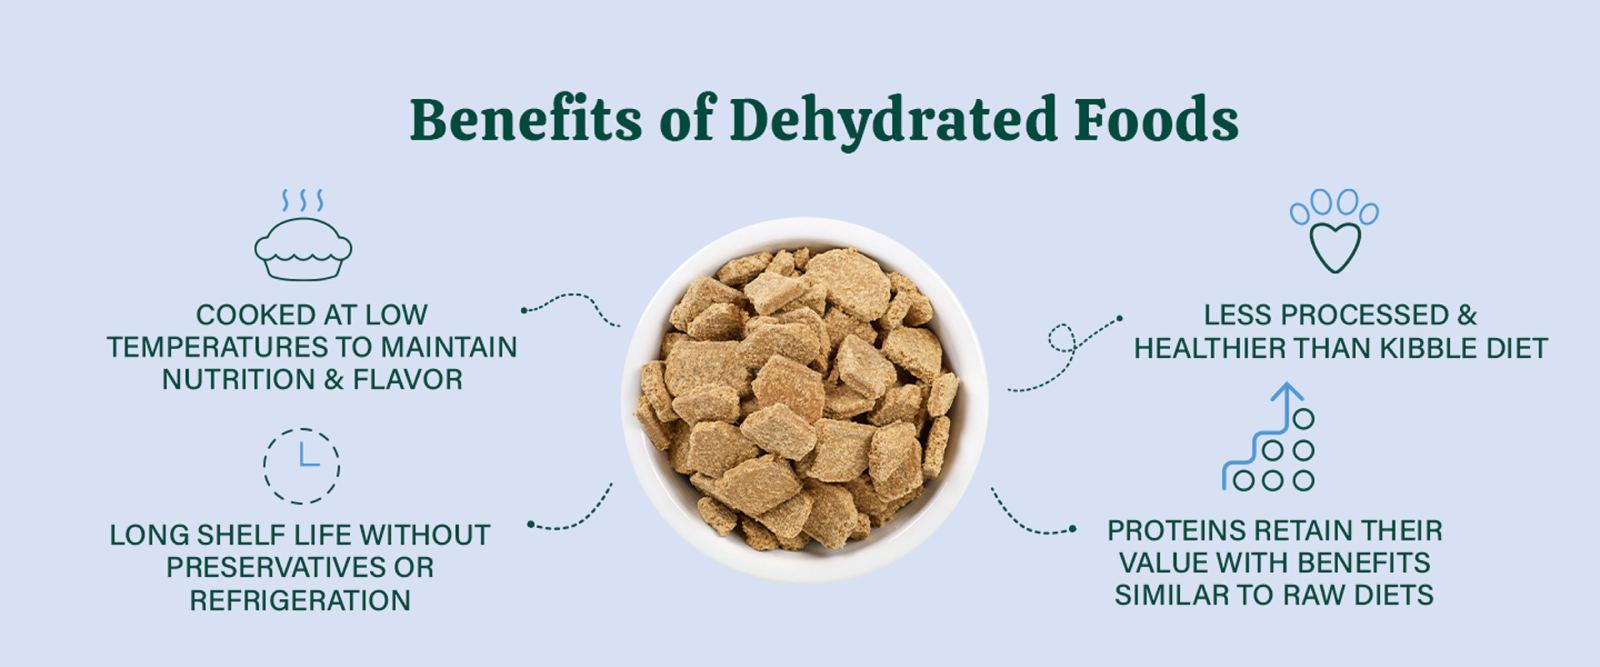 Benefits of dehydrated food for dogs includes long shelf life, cooked at low temperatures and less processed than kibble